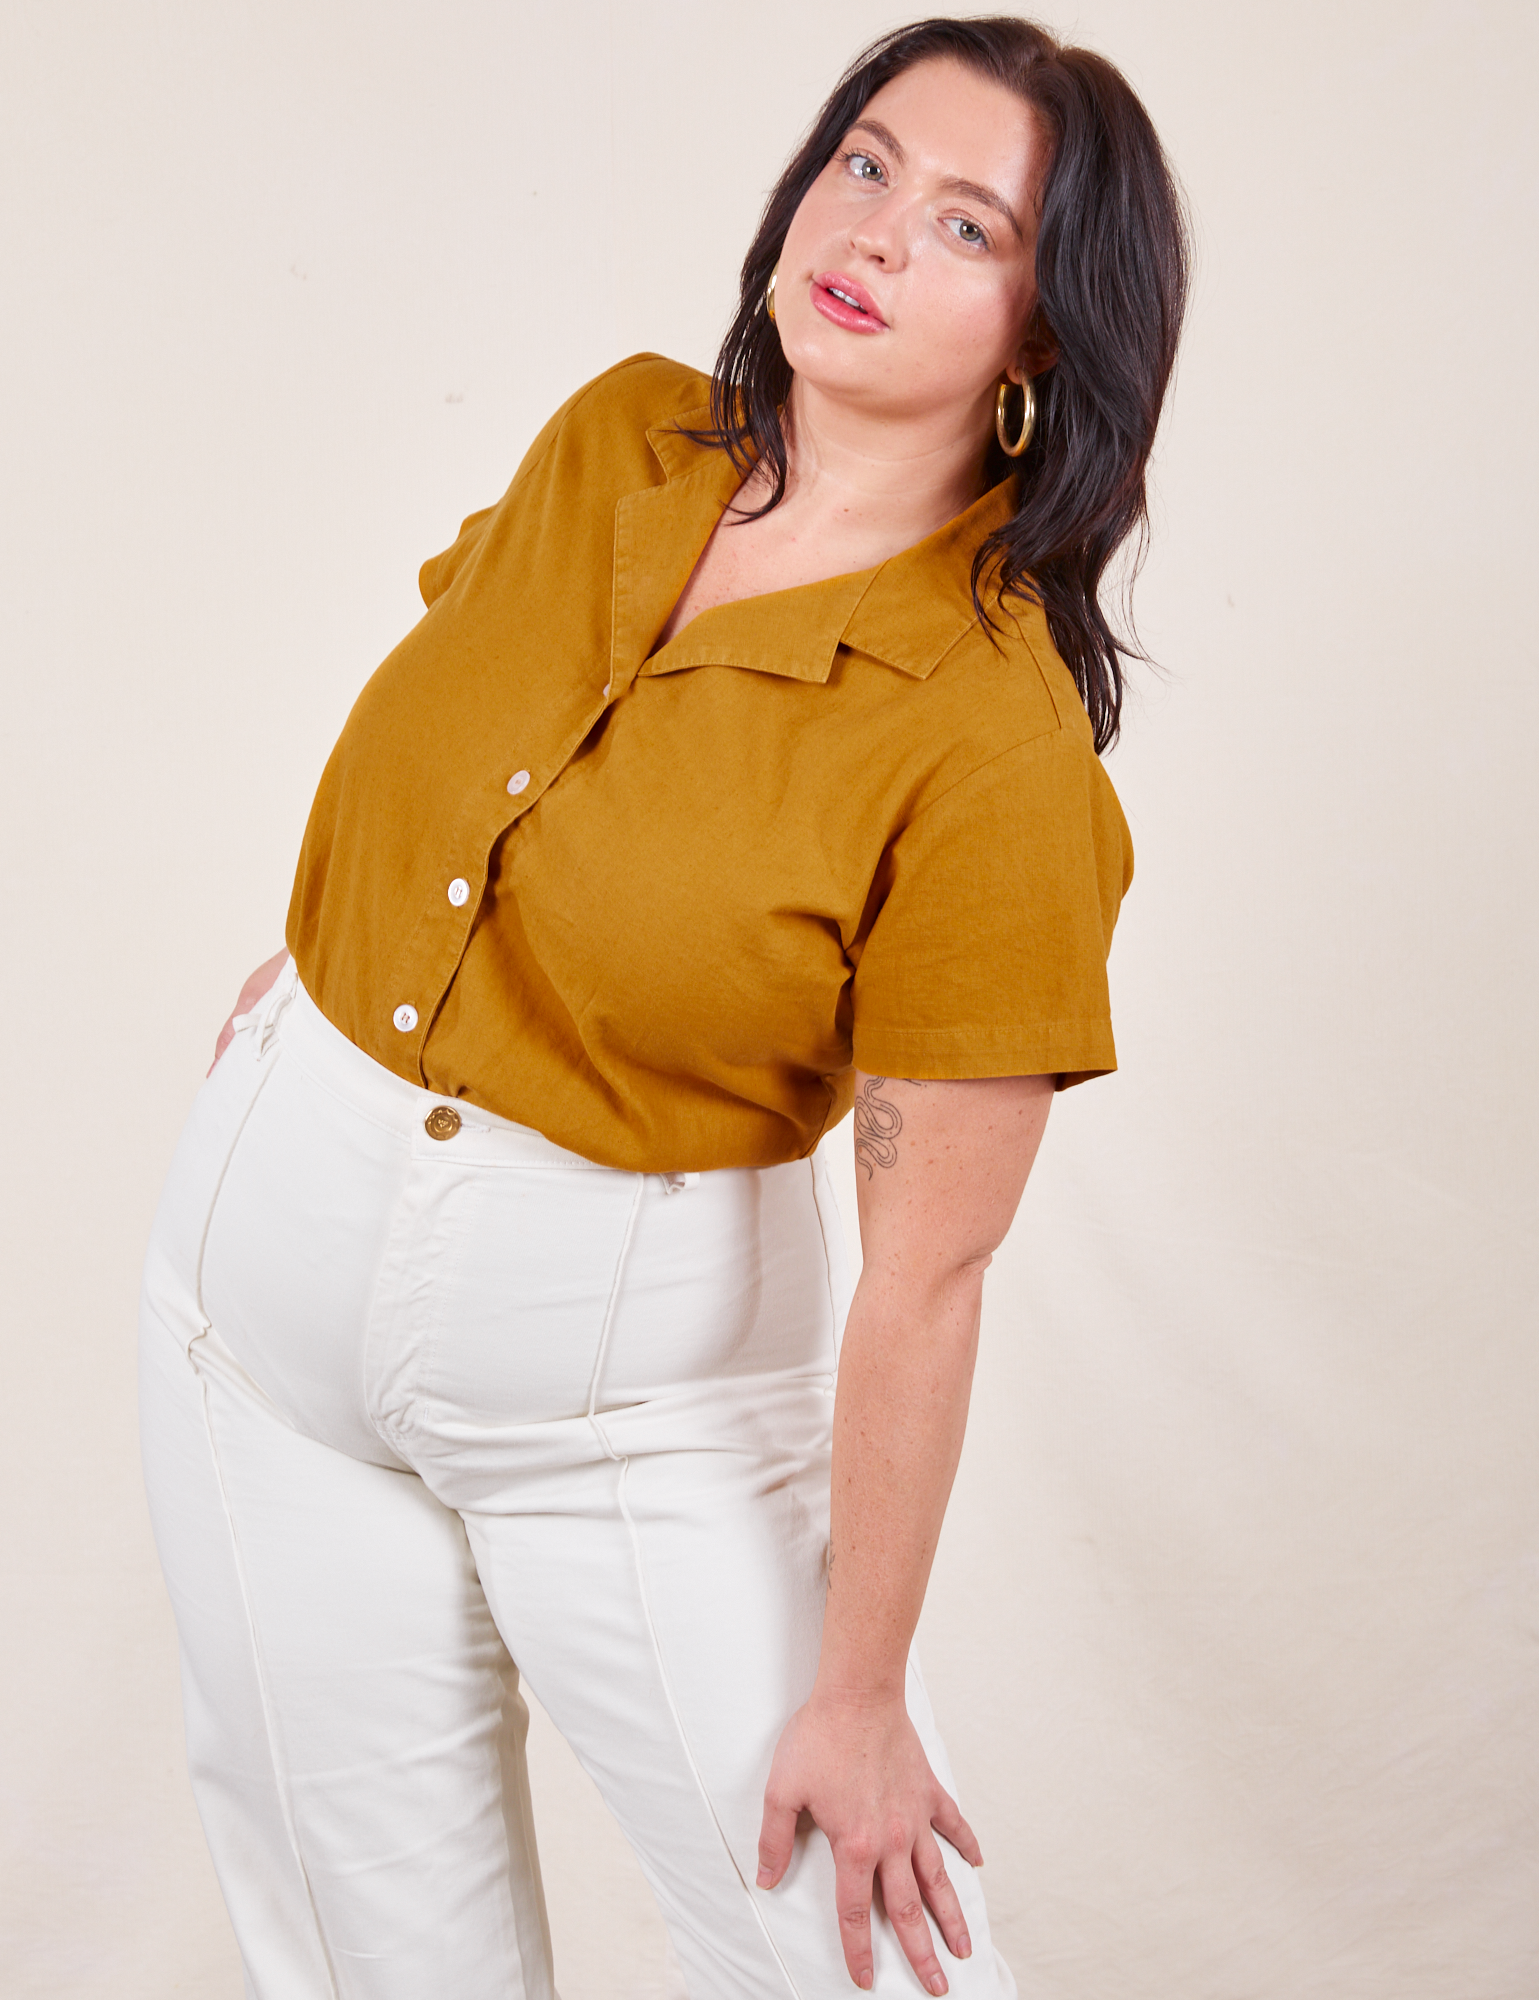 Faye is wearing Pantry Button-Up in Spicy Mustard and vintage tee off-white Western Pants